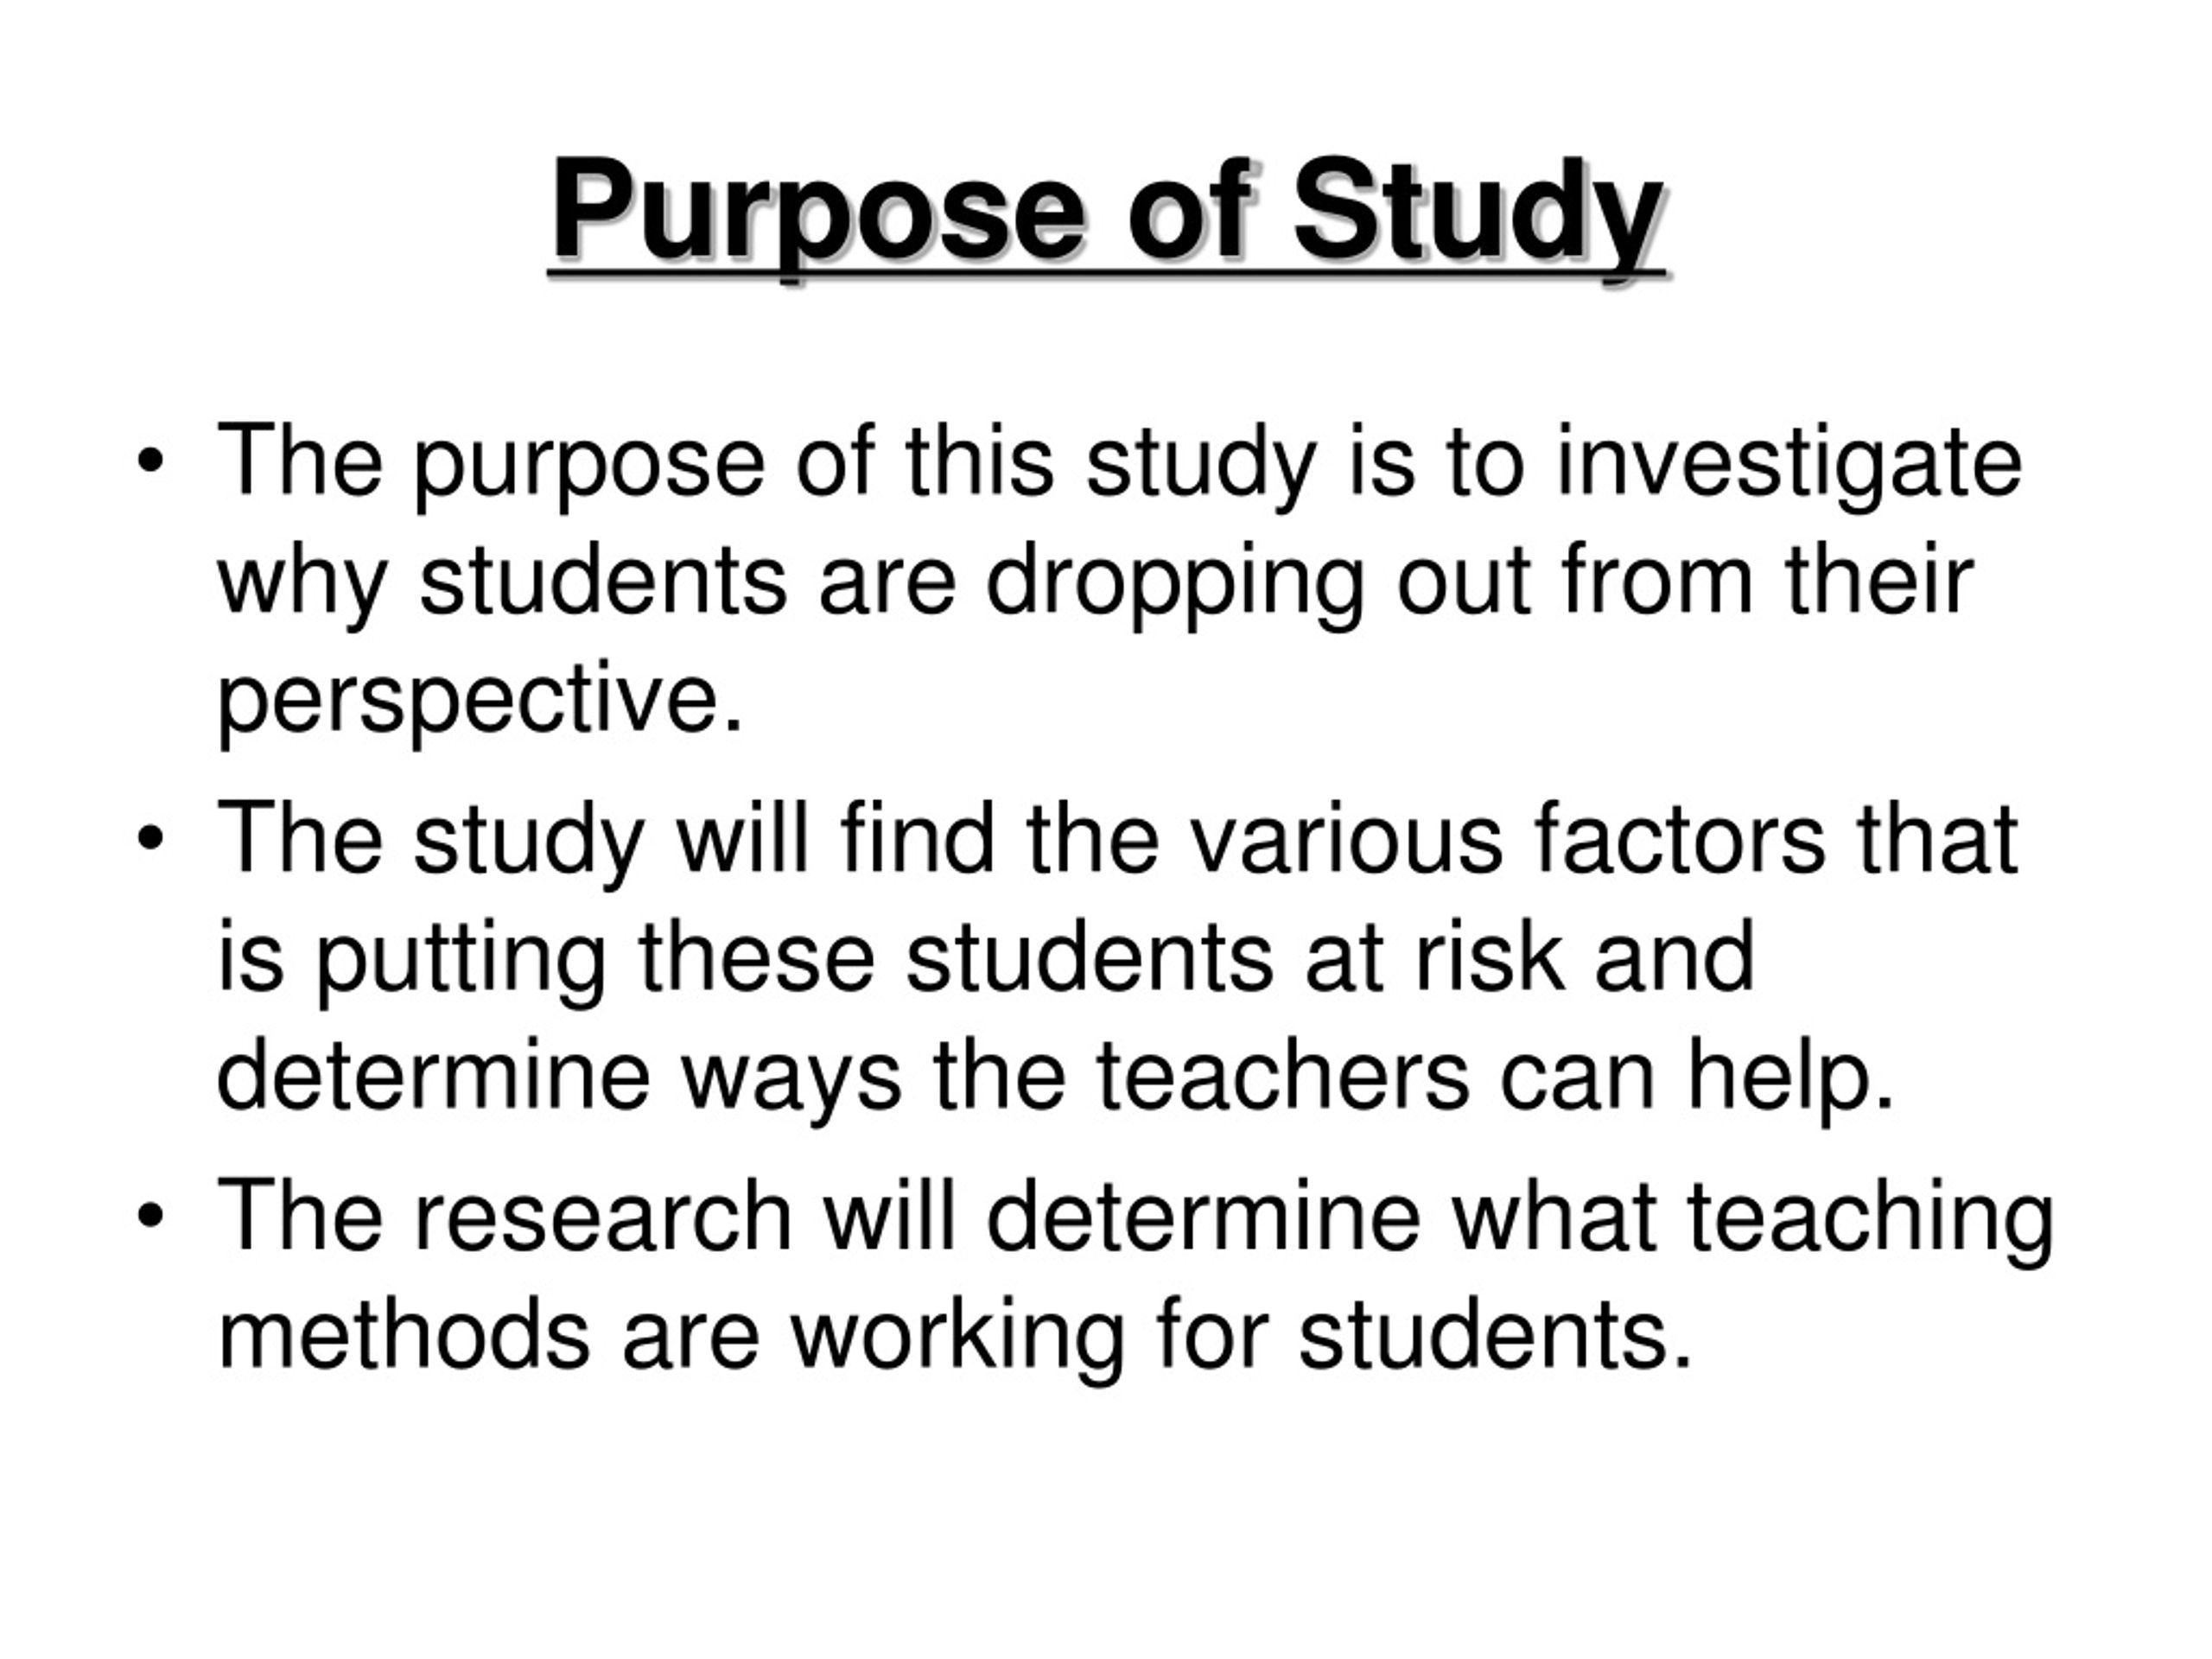 what is the purpose of the research study